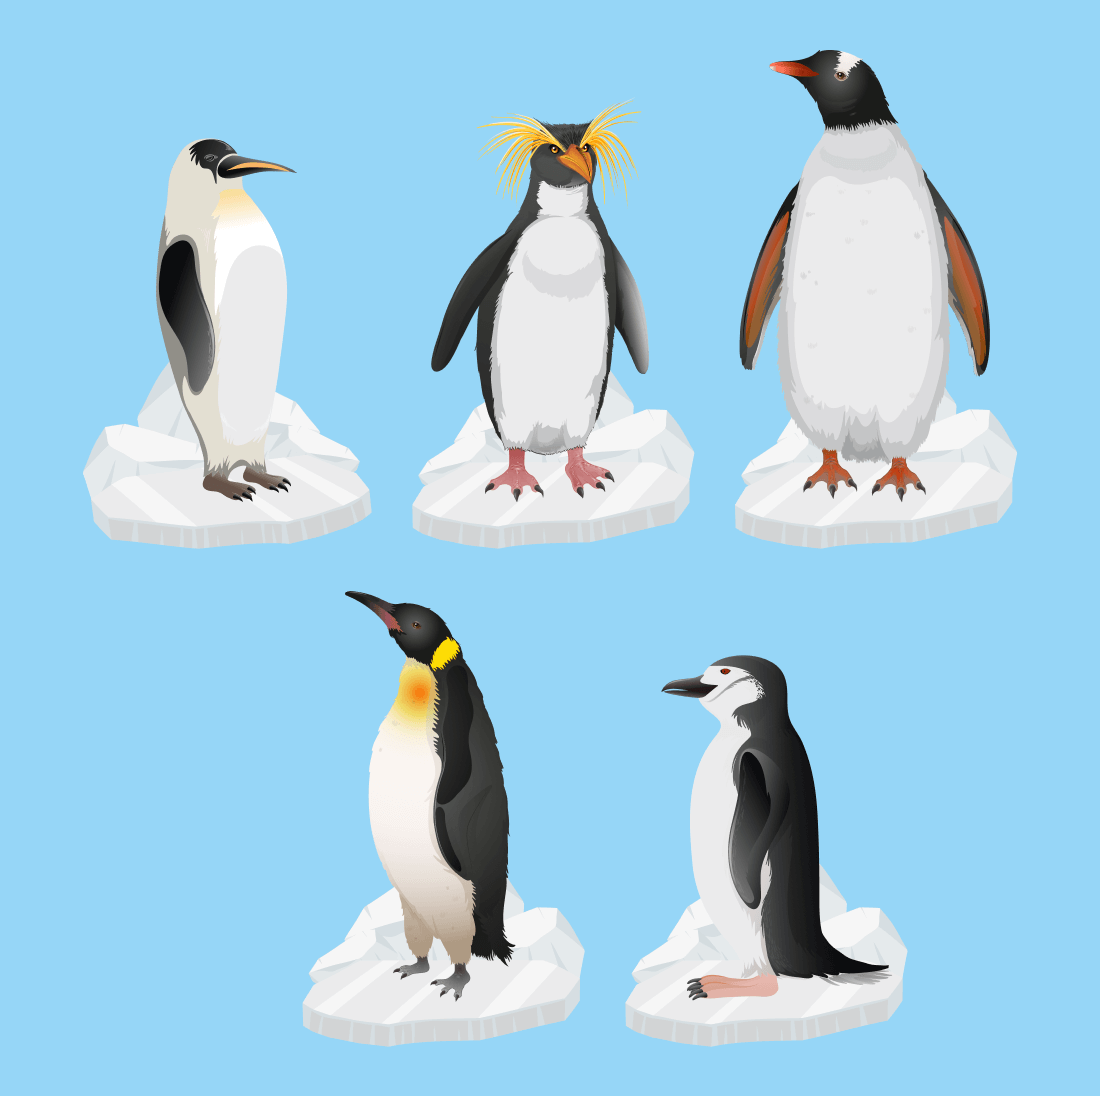 Realistic image of penguins.